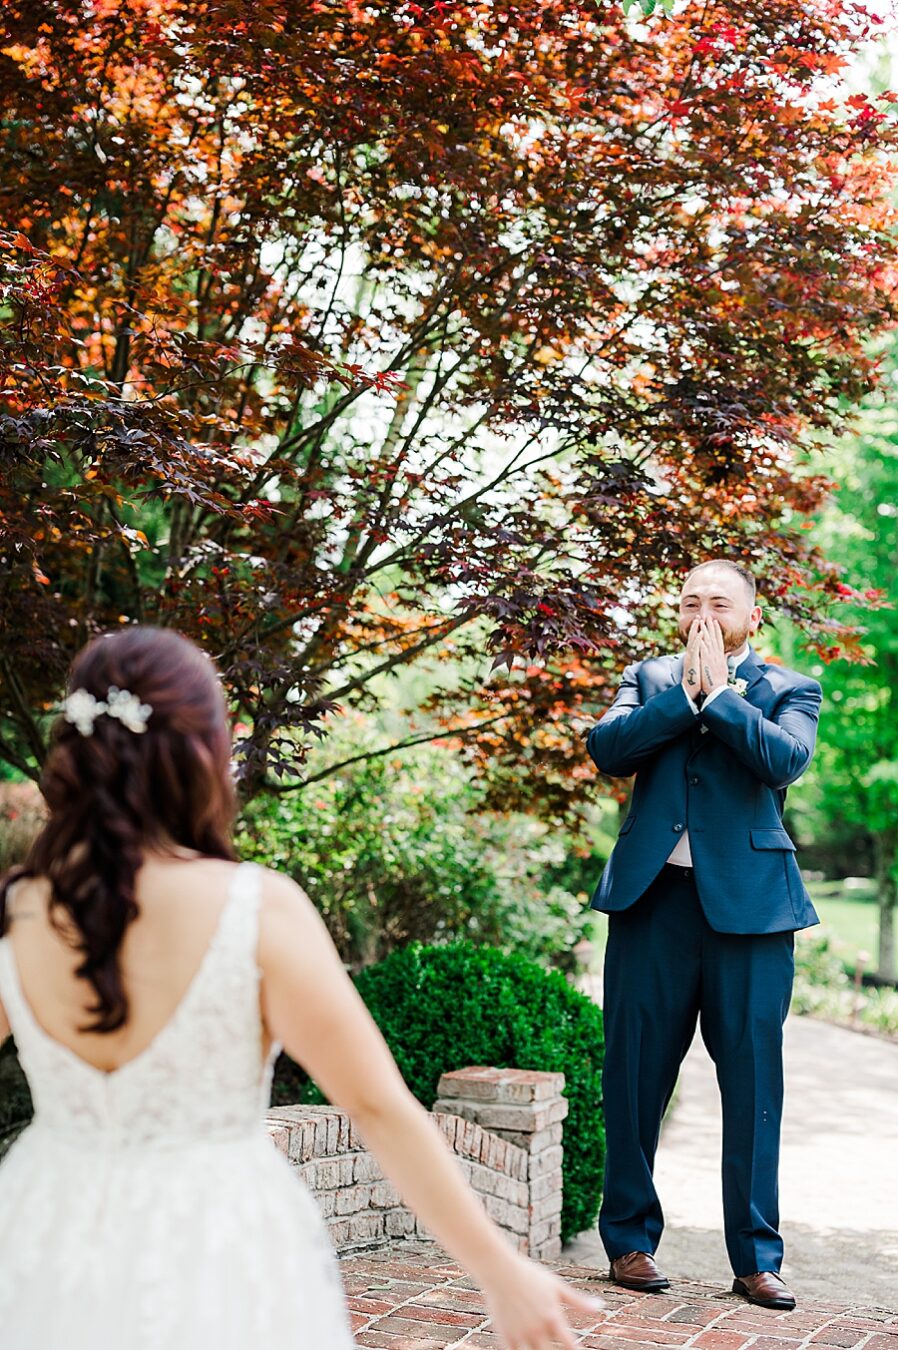 Groom's first reaction to bride at Carriage House Wedding by Amanda May Photos